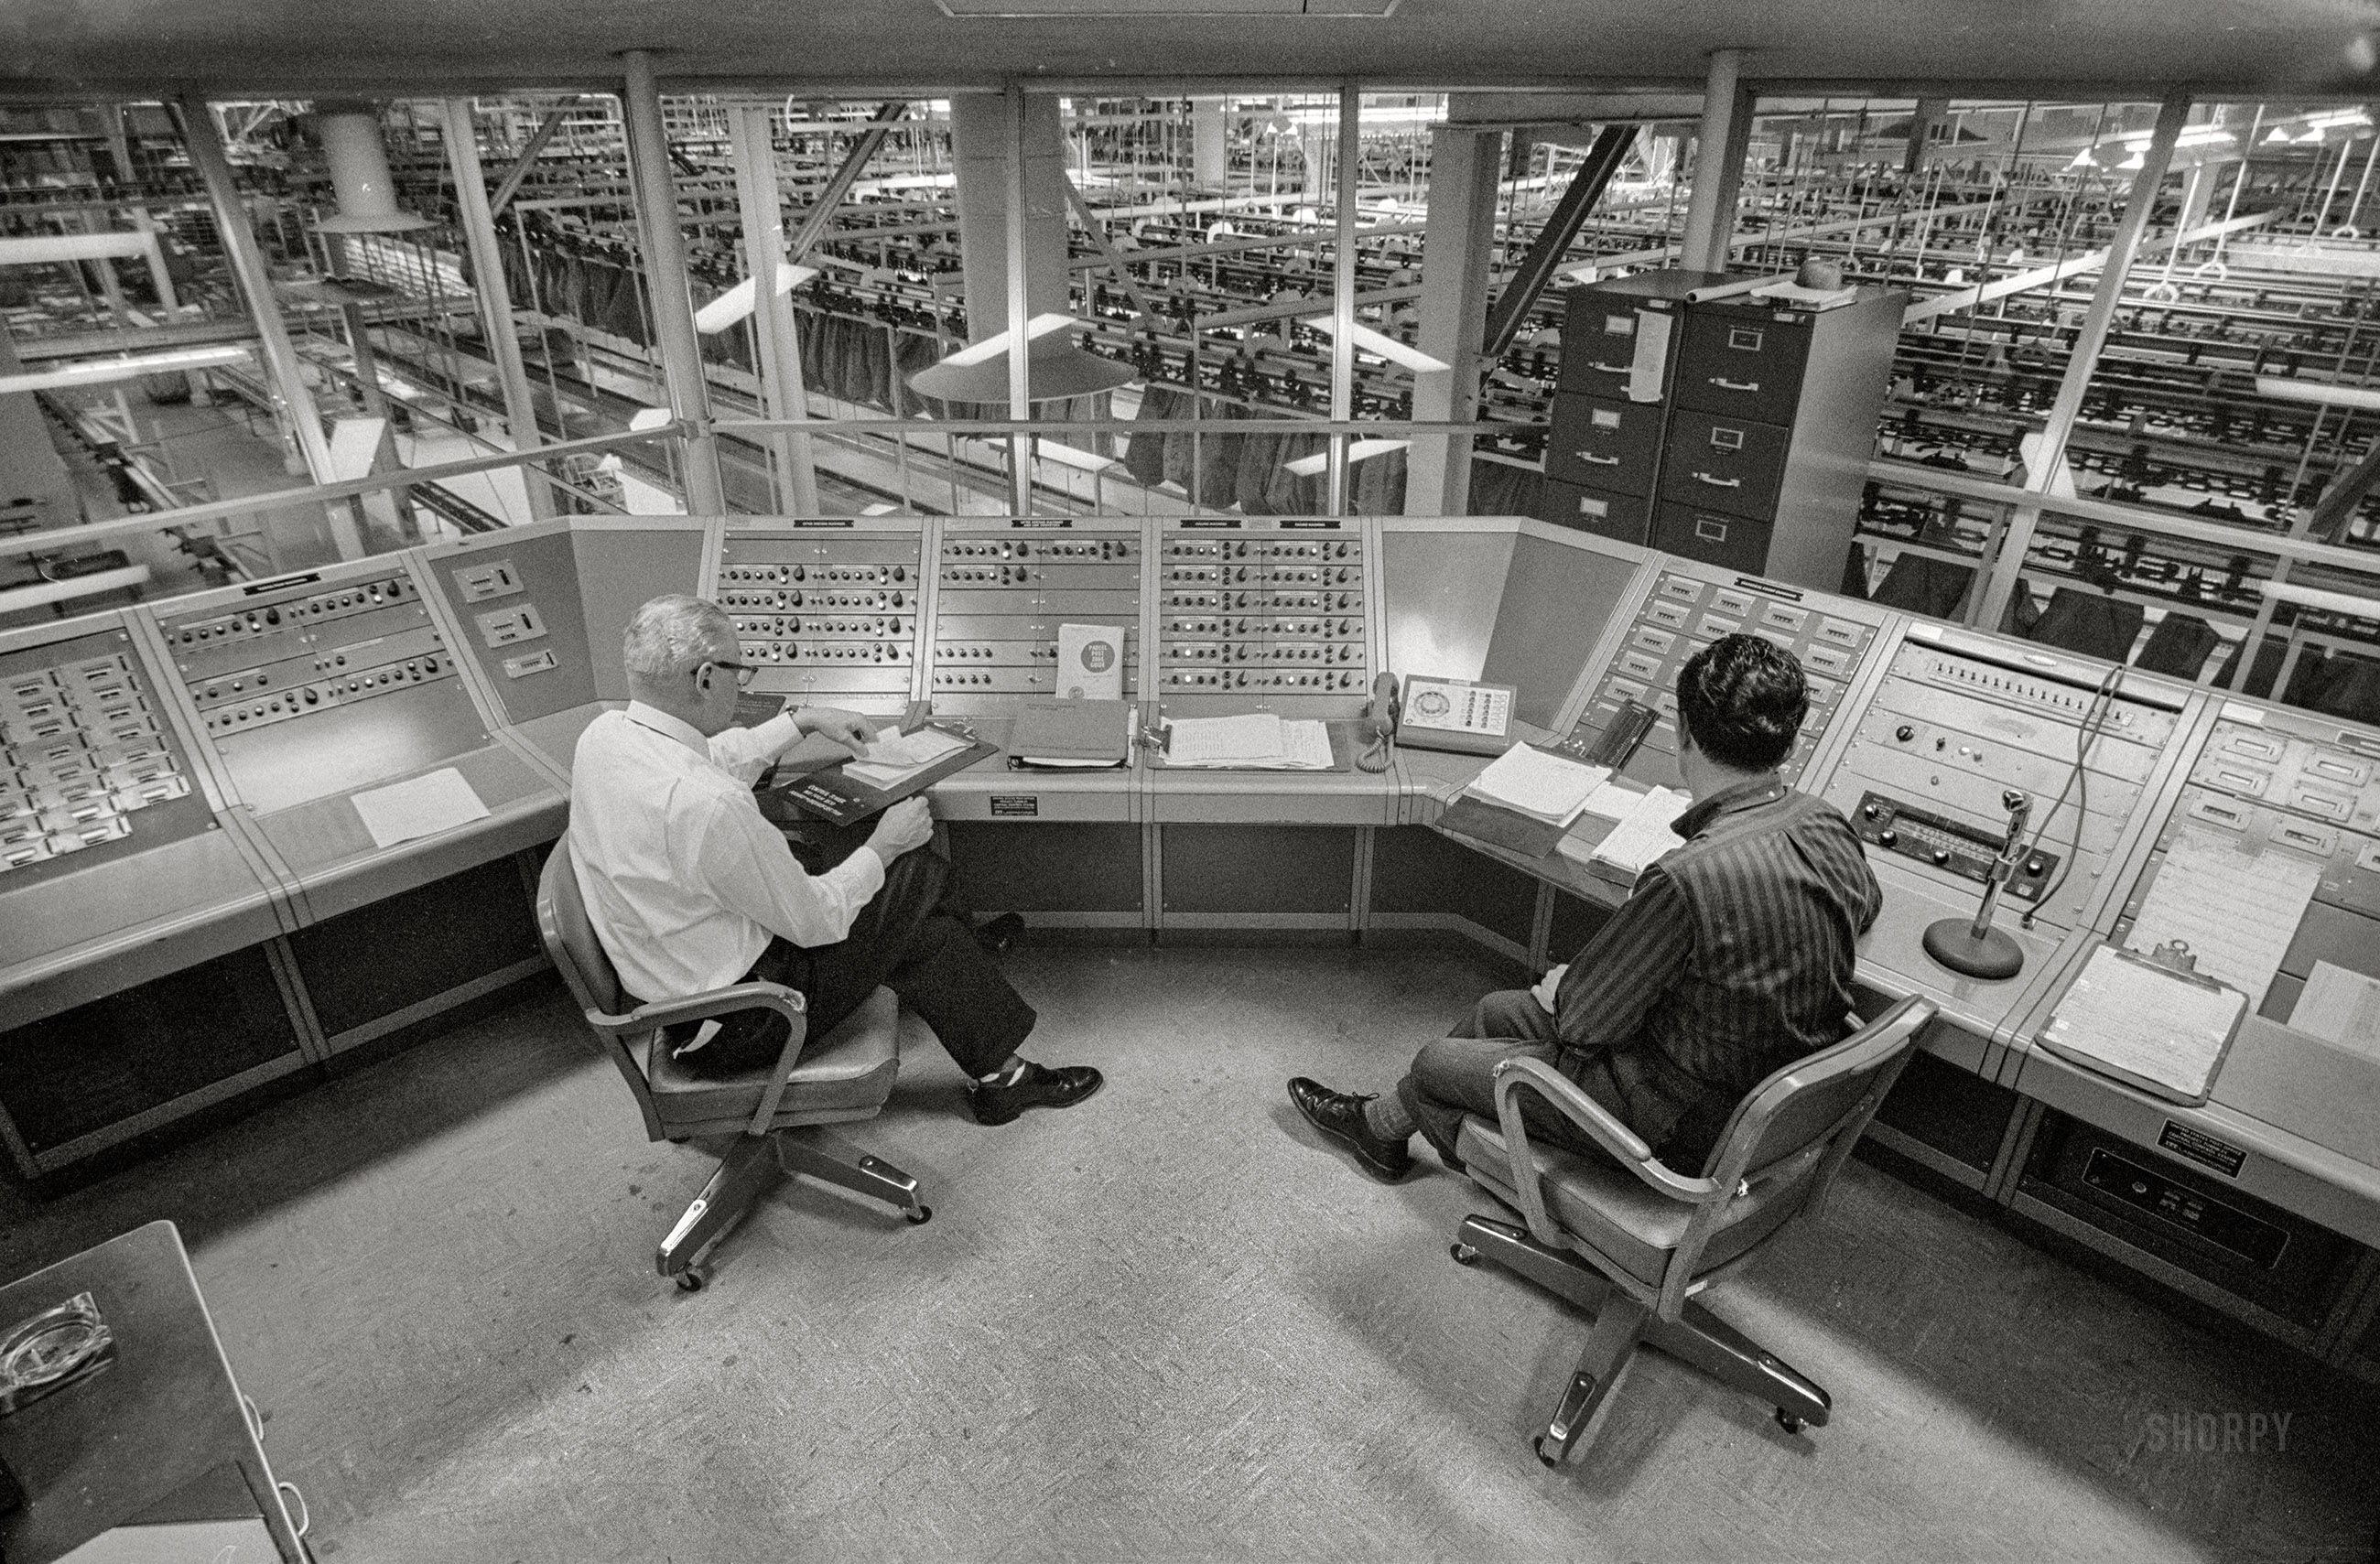 February 7, 1963. Providence, Rhode Island. "Post Office employees sitting at Central Control System overlooking work area." 35mm acetate negative by Thomas J. O'Halloran for the U.S. News & World Report assignment "Automated Post Office." View full size.


1959: "A Post Office Ordered With Full Automation"

&nbsp; &nbsp; &nbsp; &nbsp; WASHINGTON, Feb. 3 -- Orders for the construction of "Project Turnkey," the nation's first fully mechanized Post Office, were given today by Postmaster Arthur E. Summerfield. The office will be built and equipped in Providence, R.I., by Intelex Systems Inc. of New York for an estimated cost of $20 million. Intelex, a subsidiary of International Telephone and Telegraph Corporation, will then lease it to the Post Office Department for twenty years at an annual rental of $1.4 million. The mail will be entirely handled by machinery ... " (N.Y. Times, Feb. 4, 1959)

1961: "House Group Finds Automated P.O. 'Fails Miserably' "

&nbsp; &nbsp; &nbsp; &nbsp; A House subcommittee charged yesterday that Project Turnkey, the new automated post office in Providence, R.I., has "failed miserably" to meet expectations and that its cost to the Government appears to be "grossly excessive." (Washington Post, March 2, 1961)